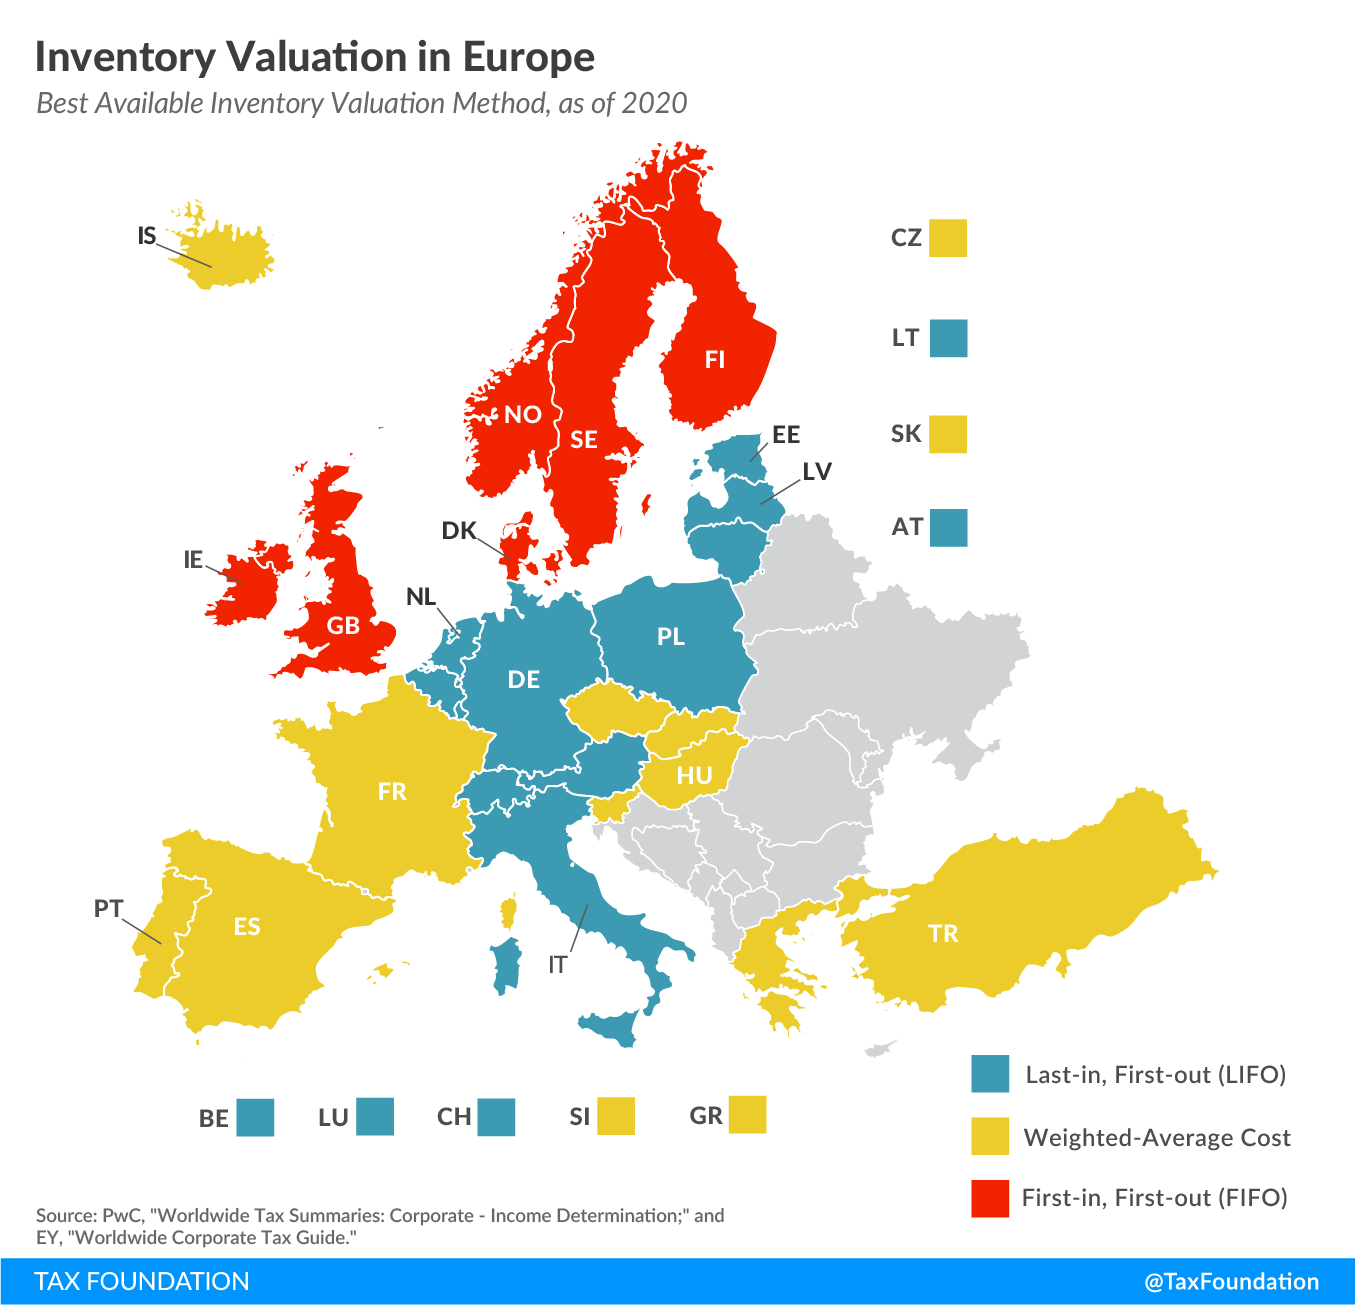 LIFO vs FIFO vs Weighted Average Cost. Inventory Valuation in Europe 2020